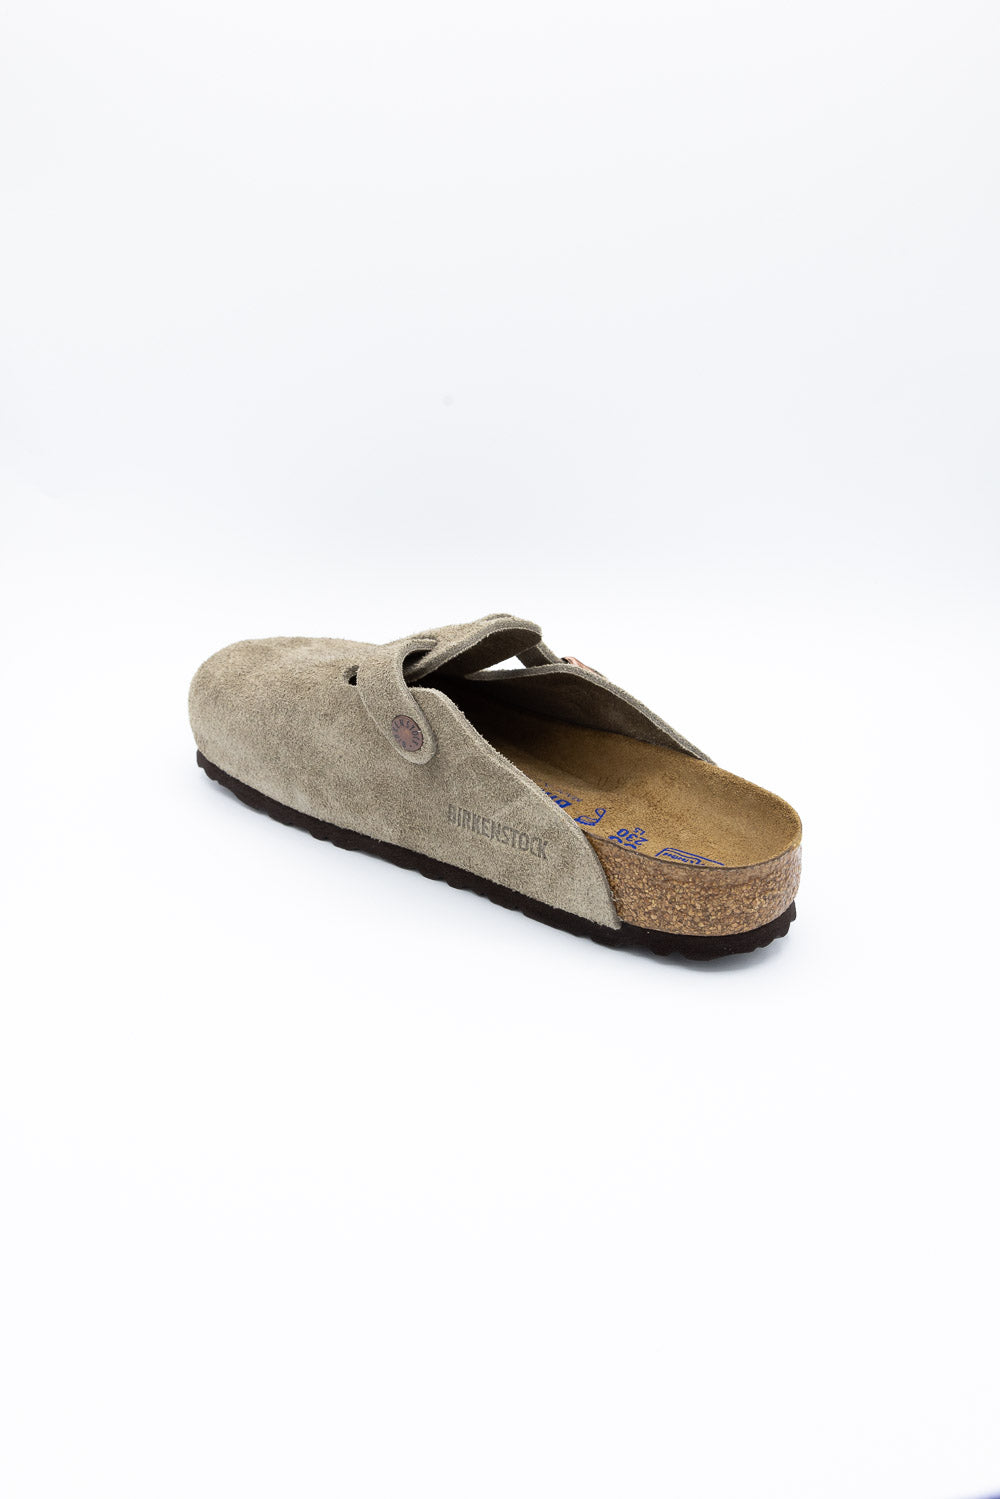 Boston Soft Footbed Suede Leather Clogs for Women in Taupe – Glik's